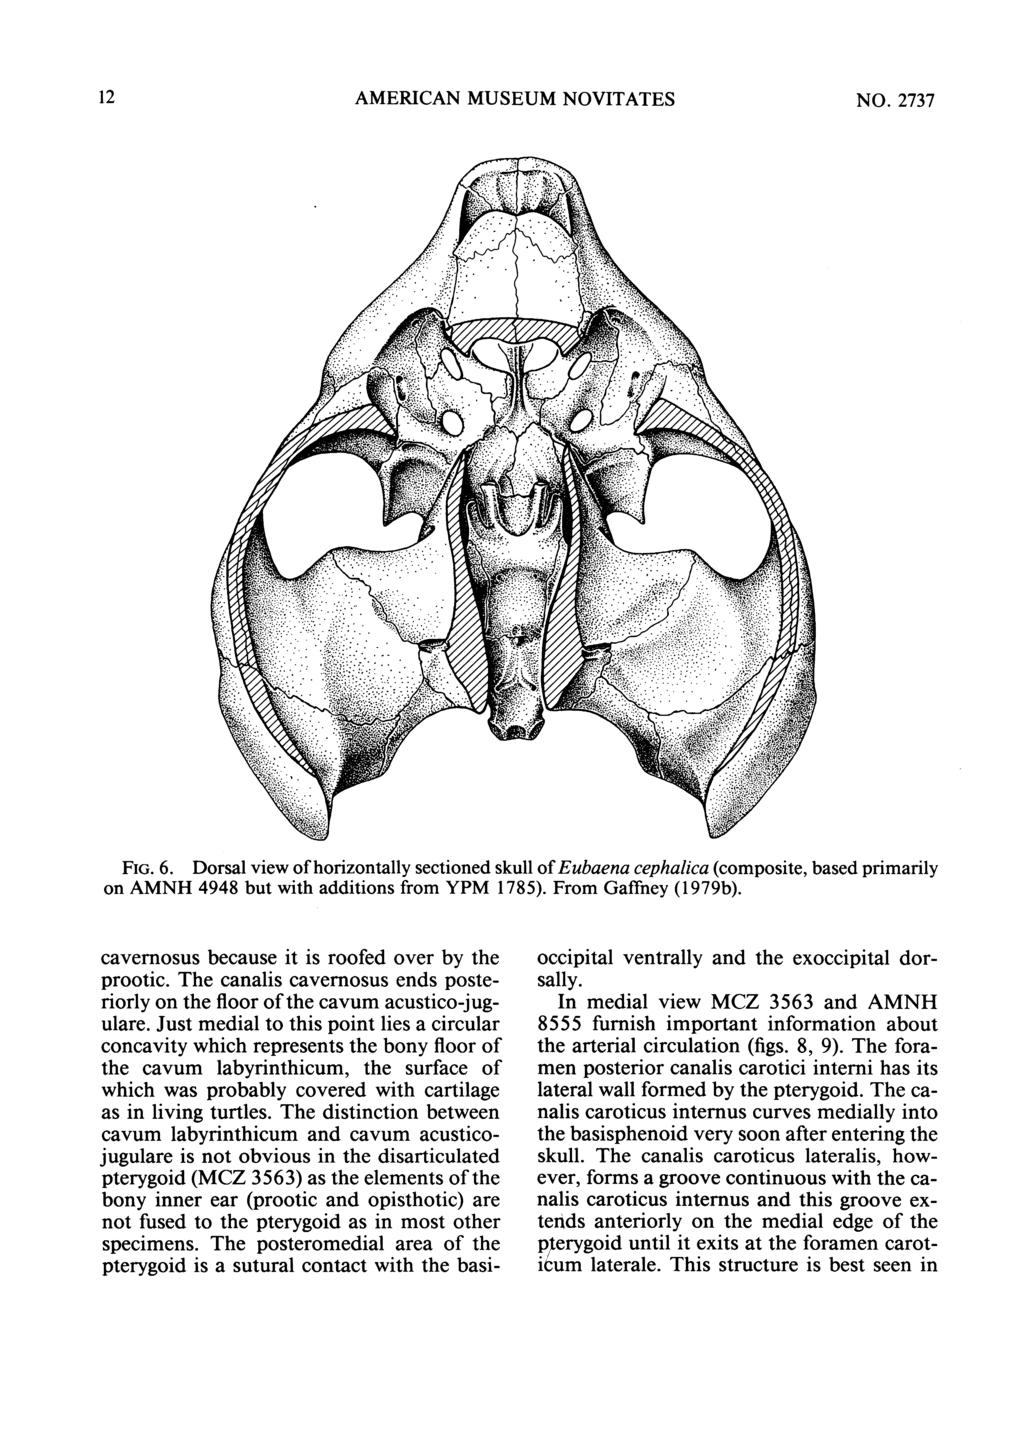 12 AMERICAN MUSEUM NOVITATES NO. 2737 FIG. 6. Dorsal view ofhorizontally sectioned skull ofeubaena cephalica (composite, based primarily on AMNH 4948 but with additions from YPM 1785).